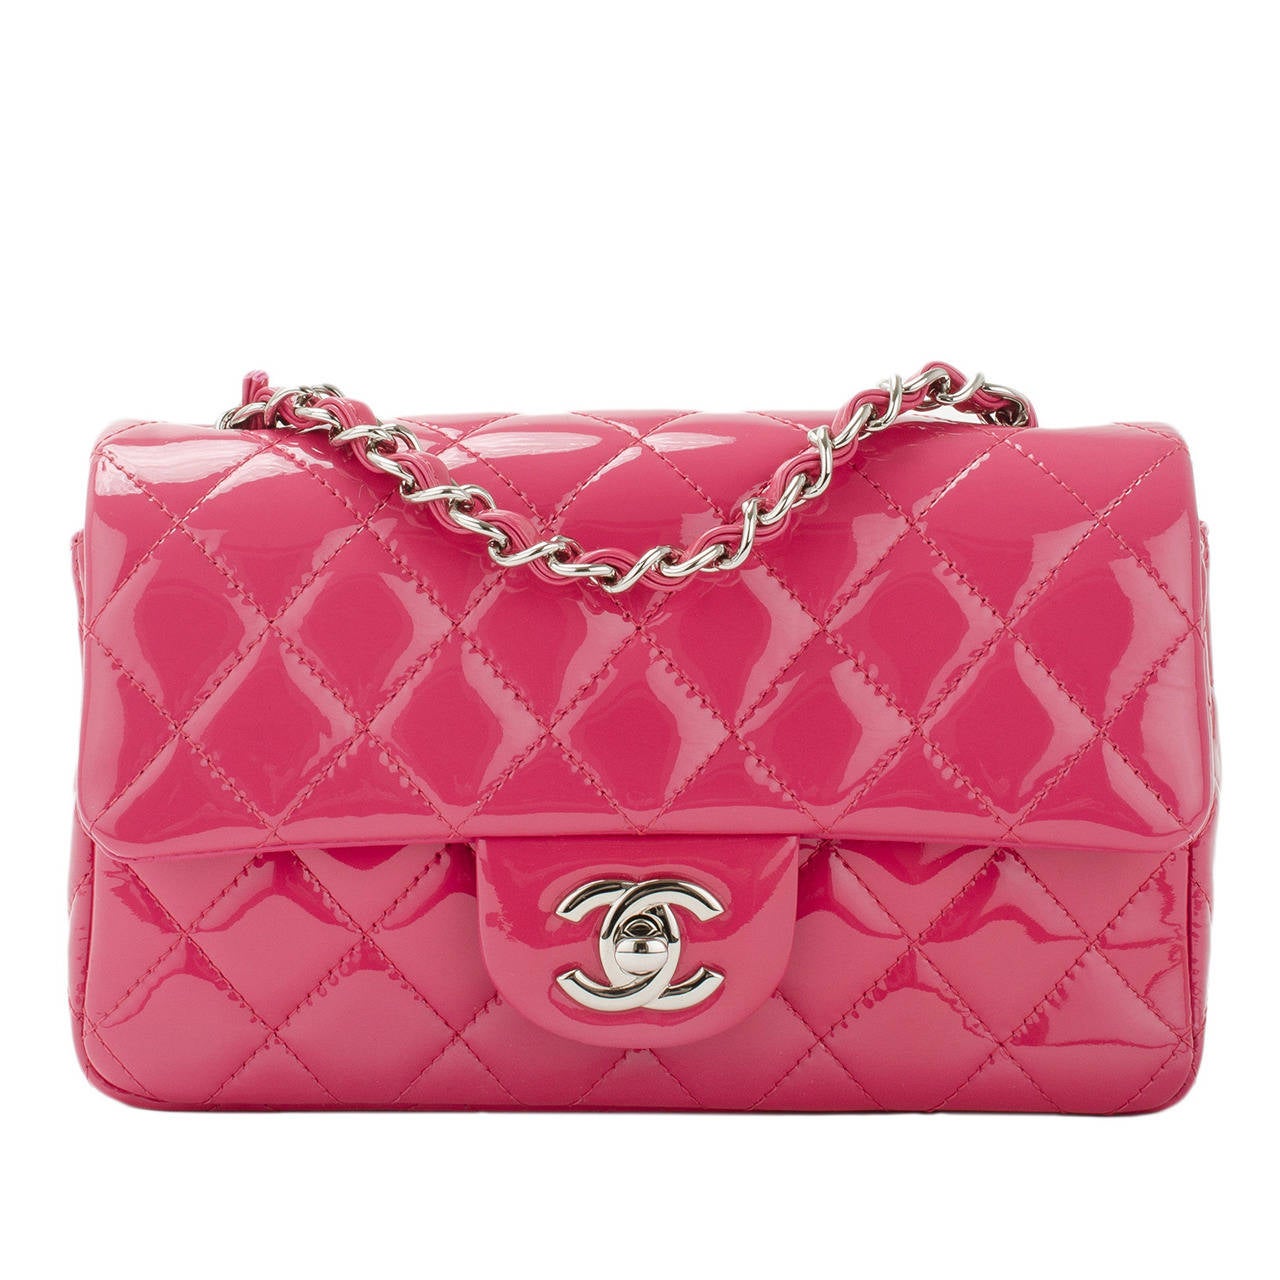 Chanel Fuchsia Pink Quilted Patent Small Classic Flap Bag